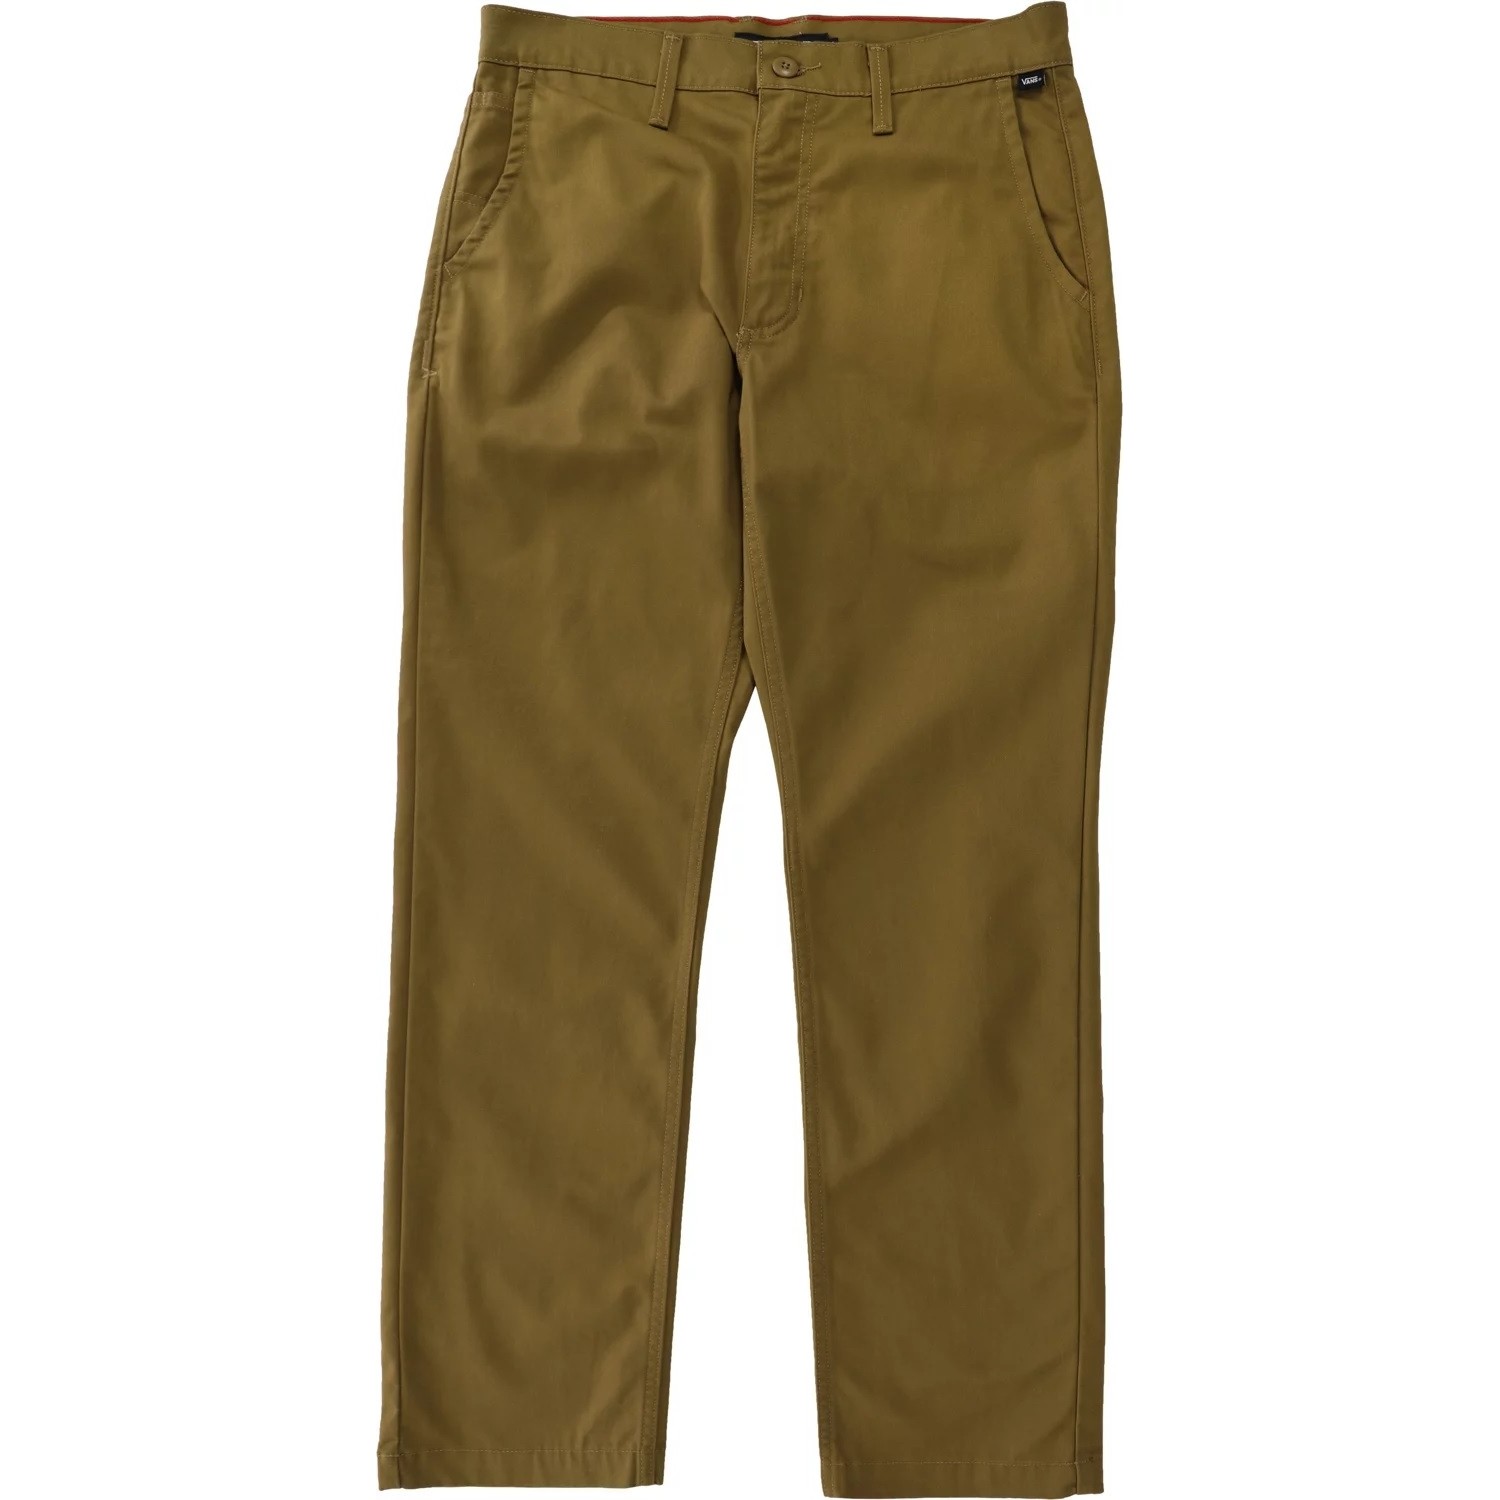 Authentic Chino Relaxed Pant (Nutria)